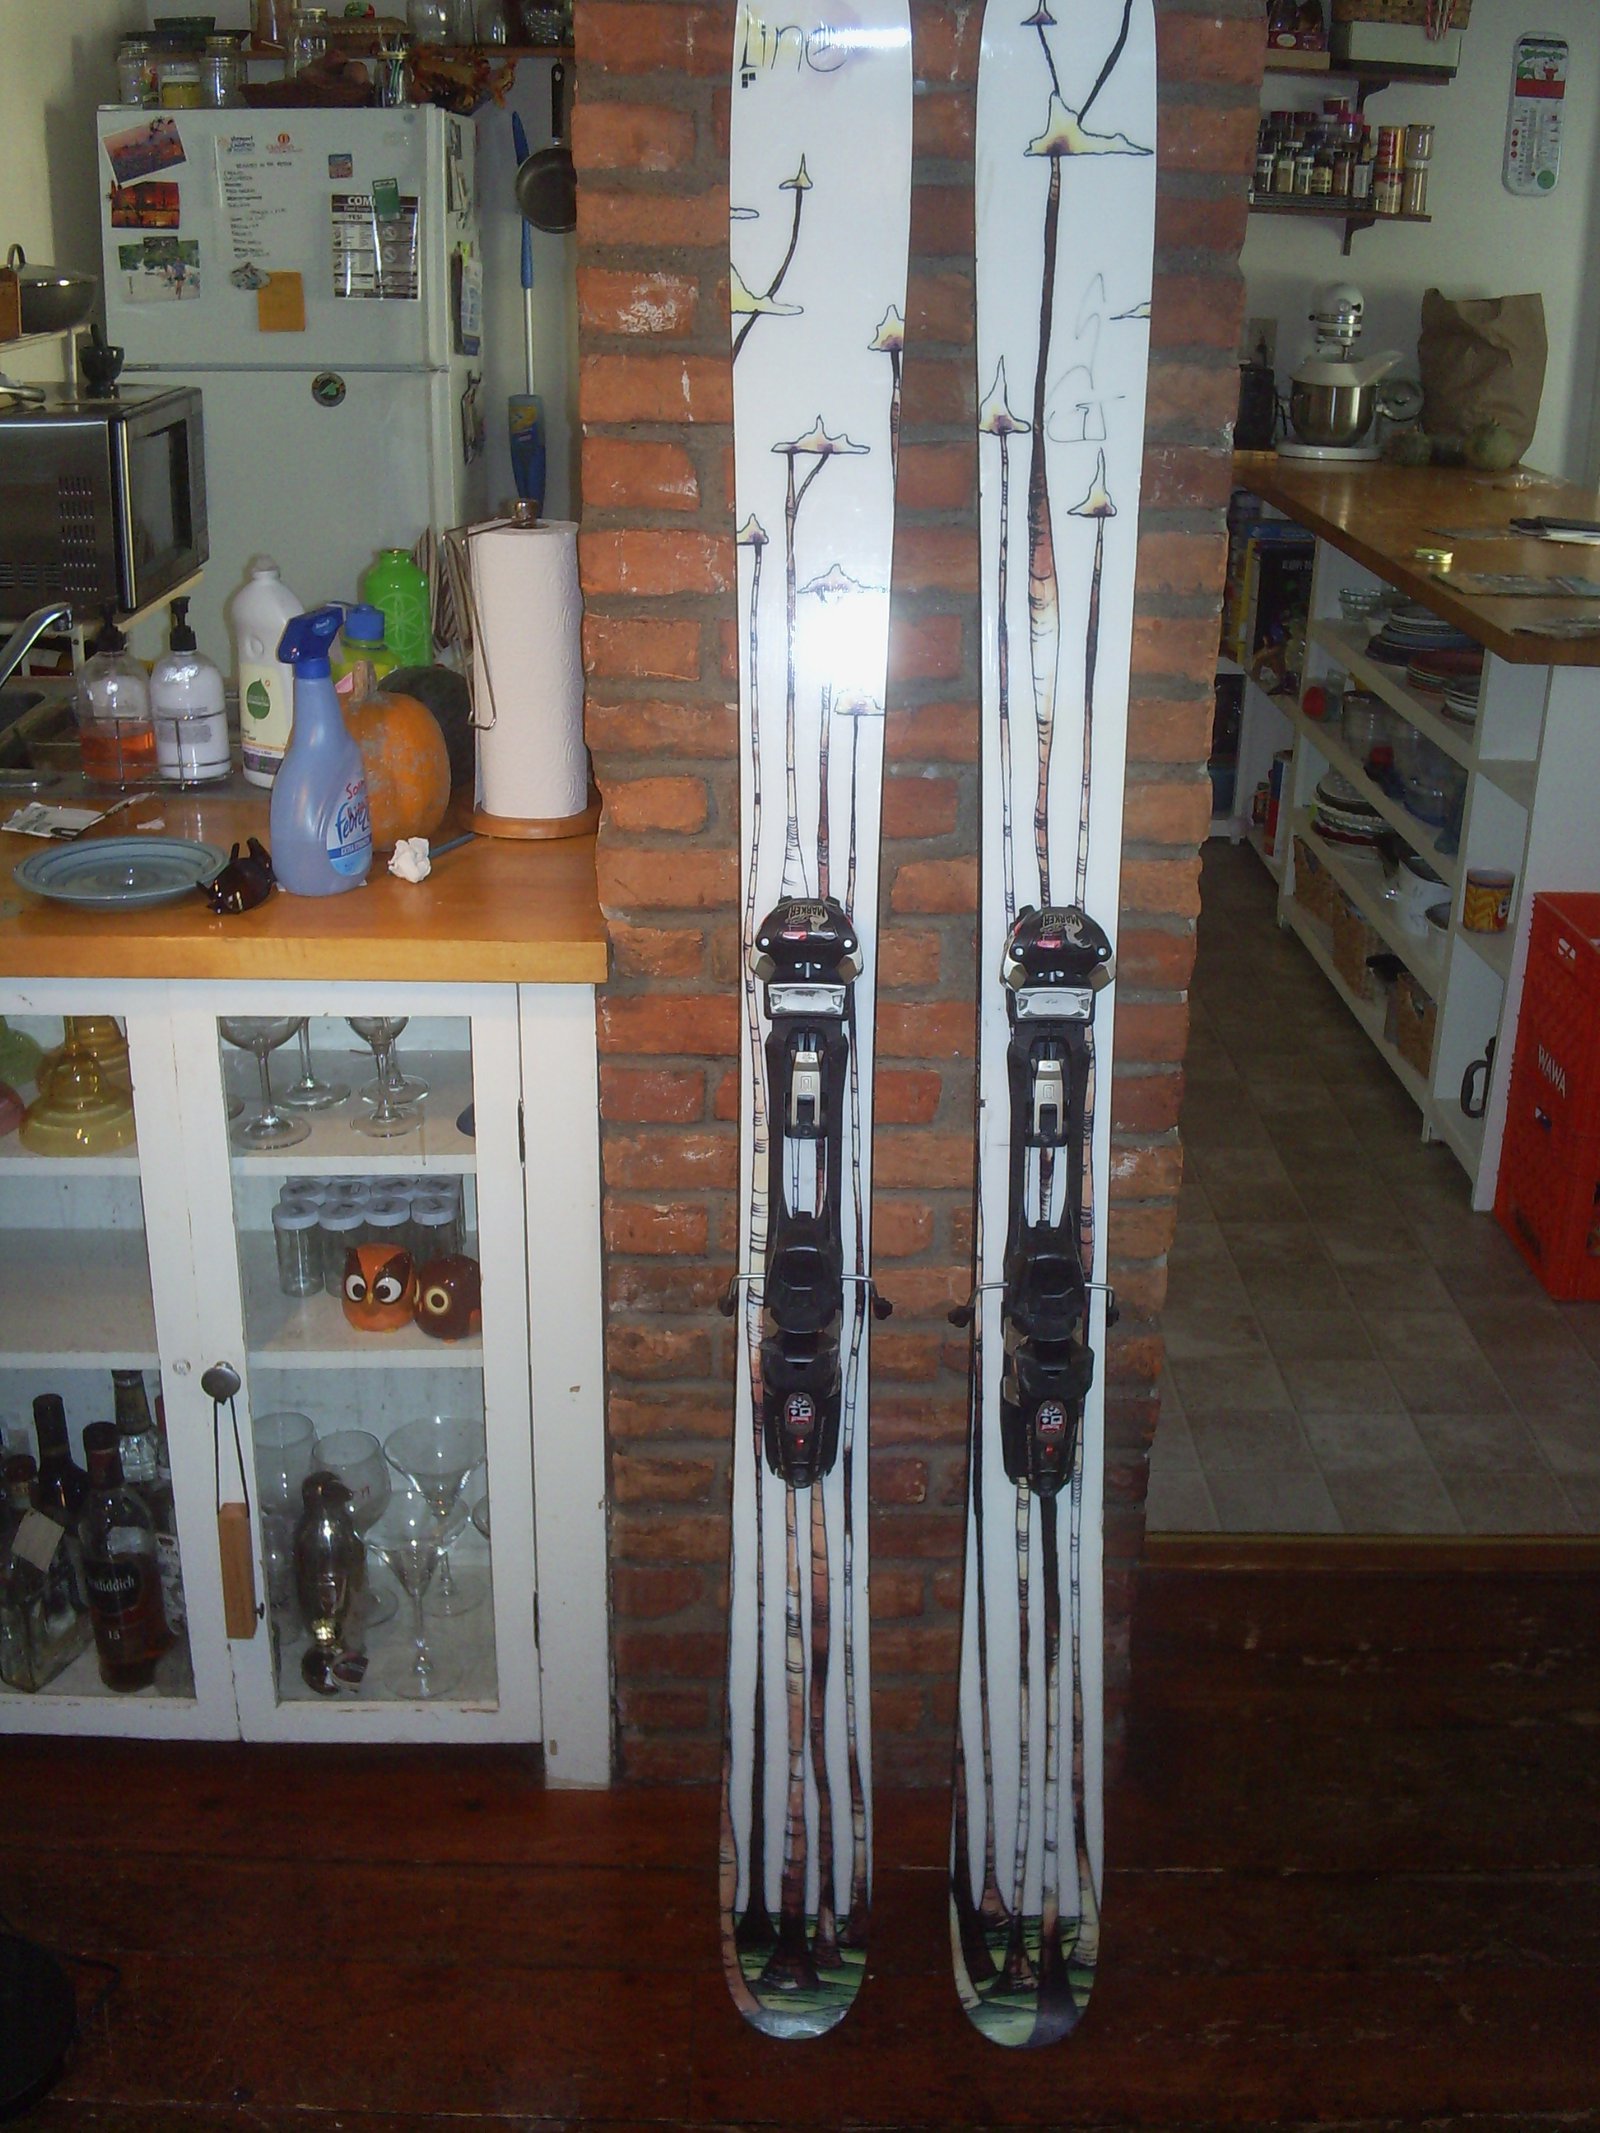 The skis